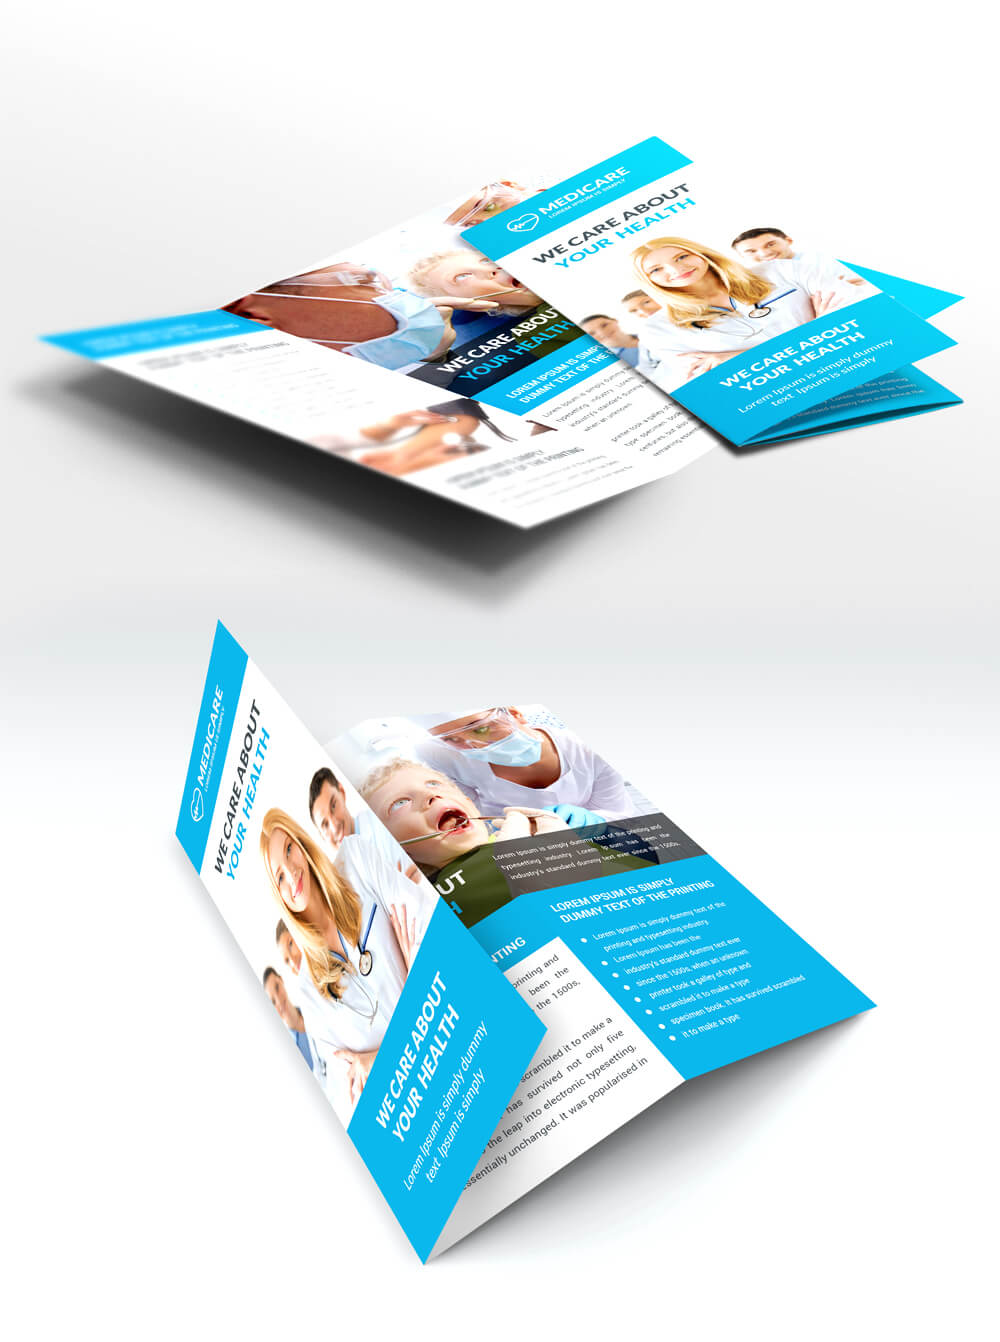 Medical Care And Hospital Trifold Brochure Template Free Psd For Pharmacy Brochure Template Free